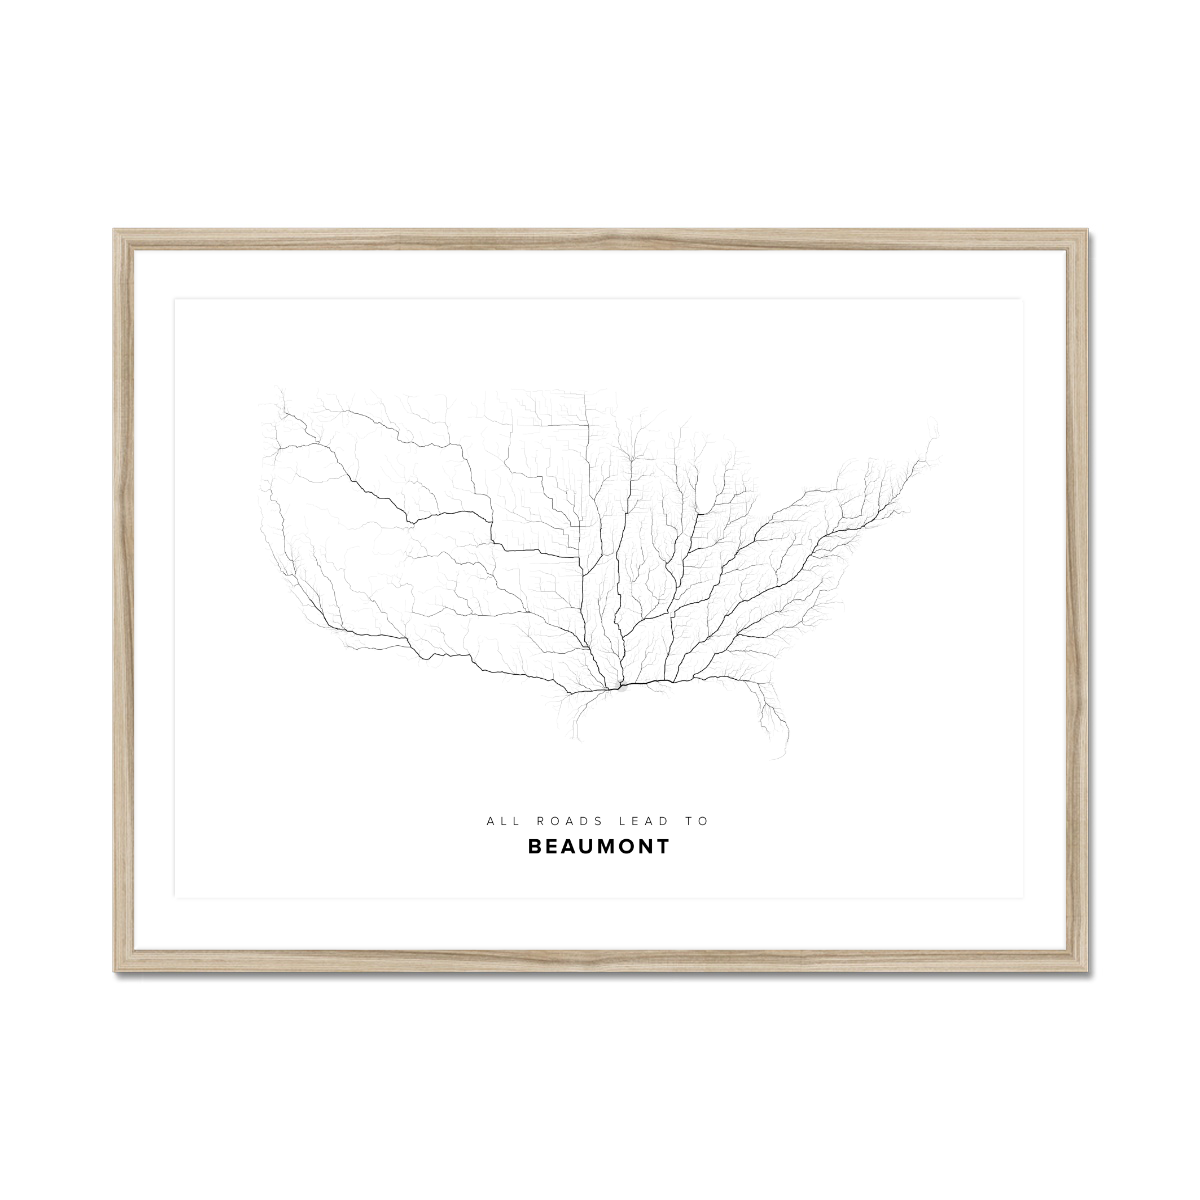 All roads lead to Beaumont (United States of America) Fine Art Map Print